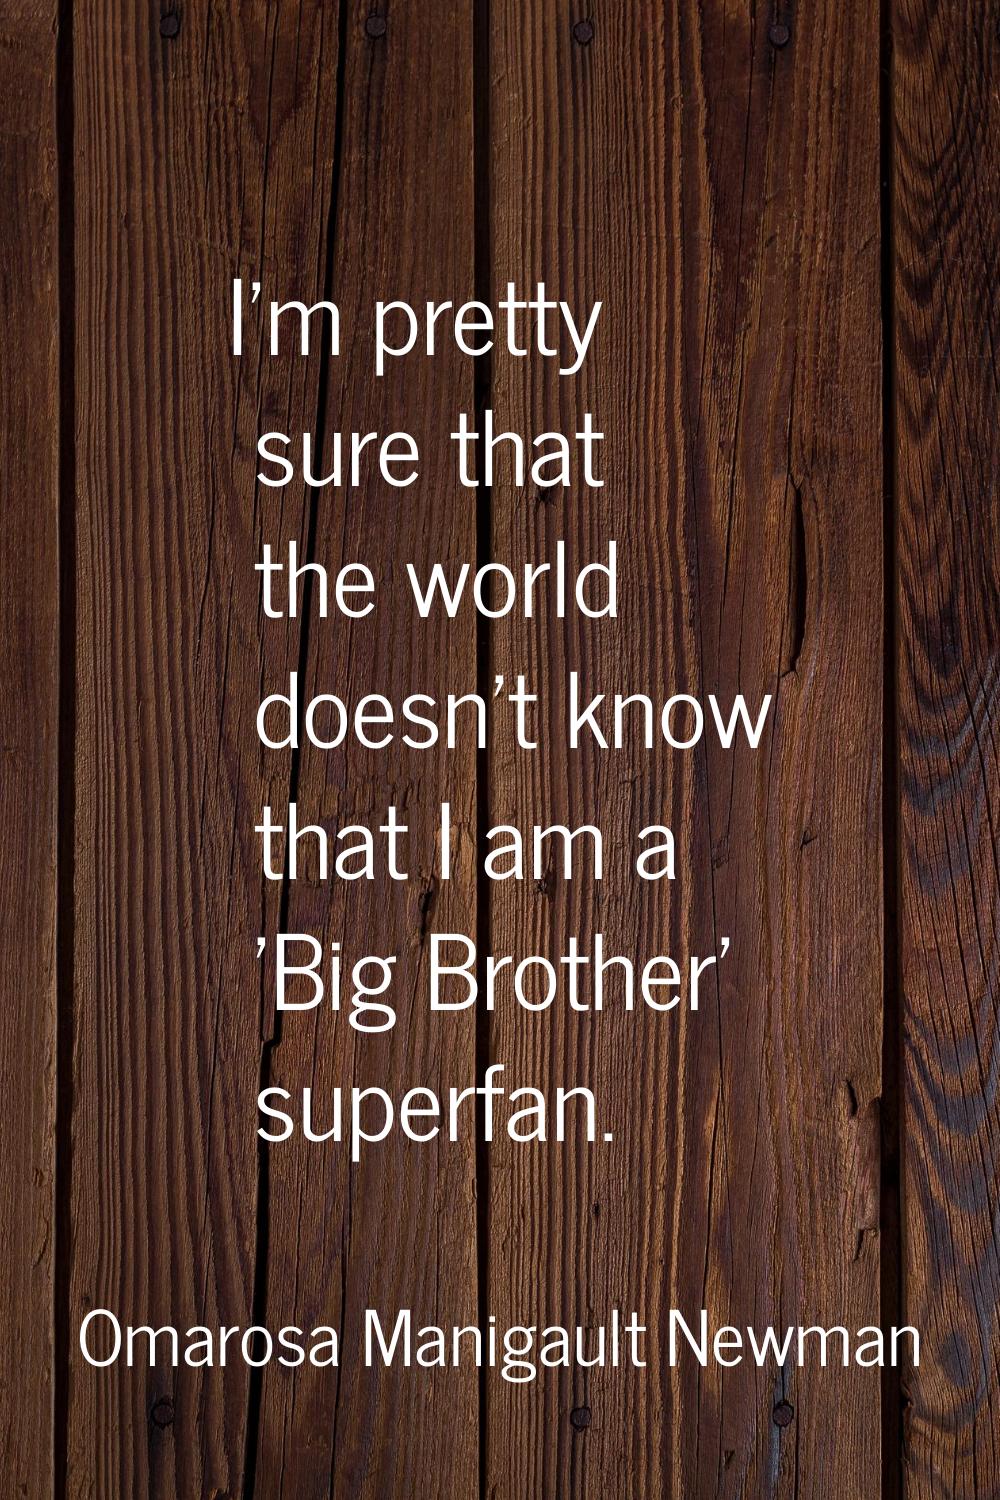 I'm pretty sure that the world doesn't know that I am a 'Big Brother' superfan.